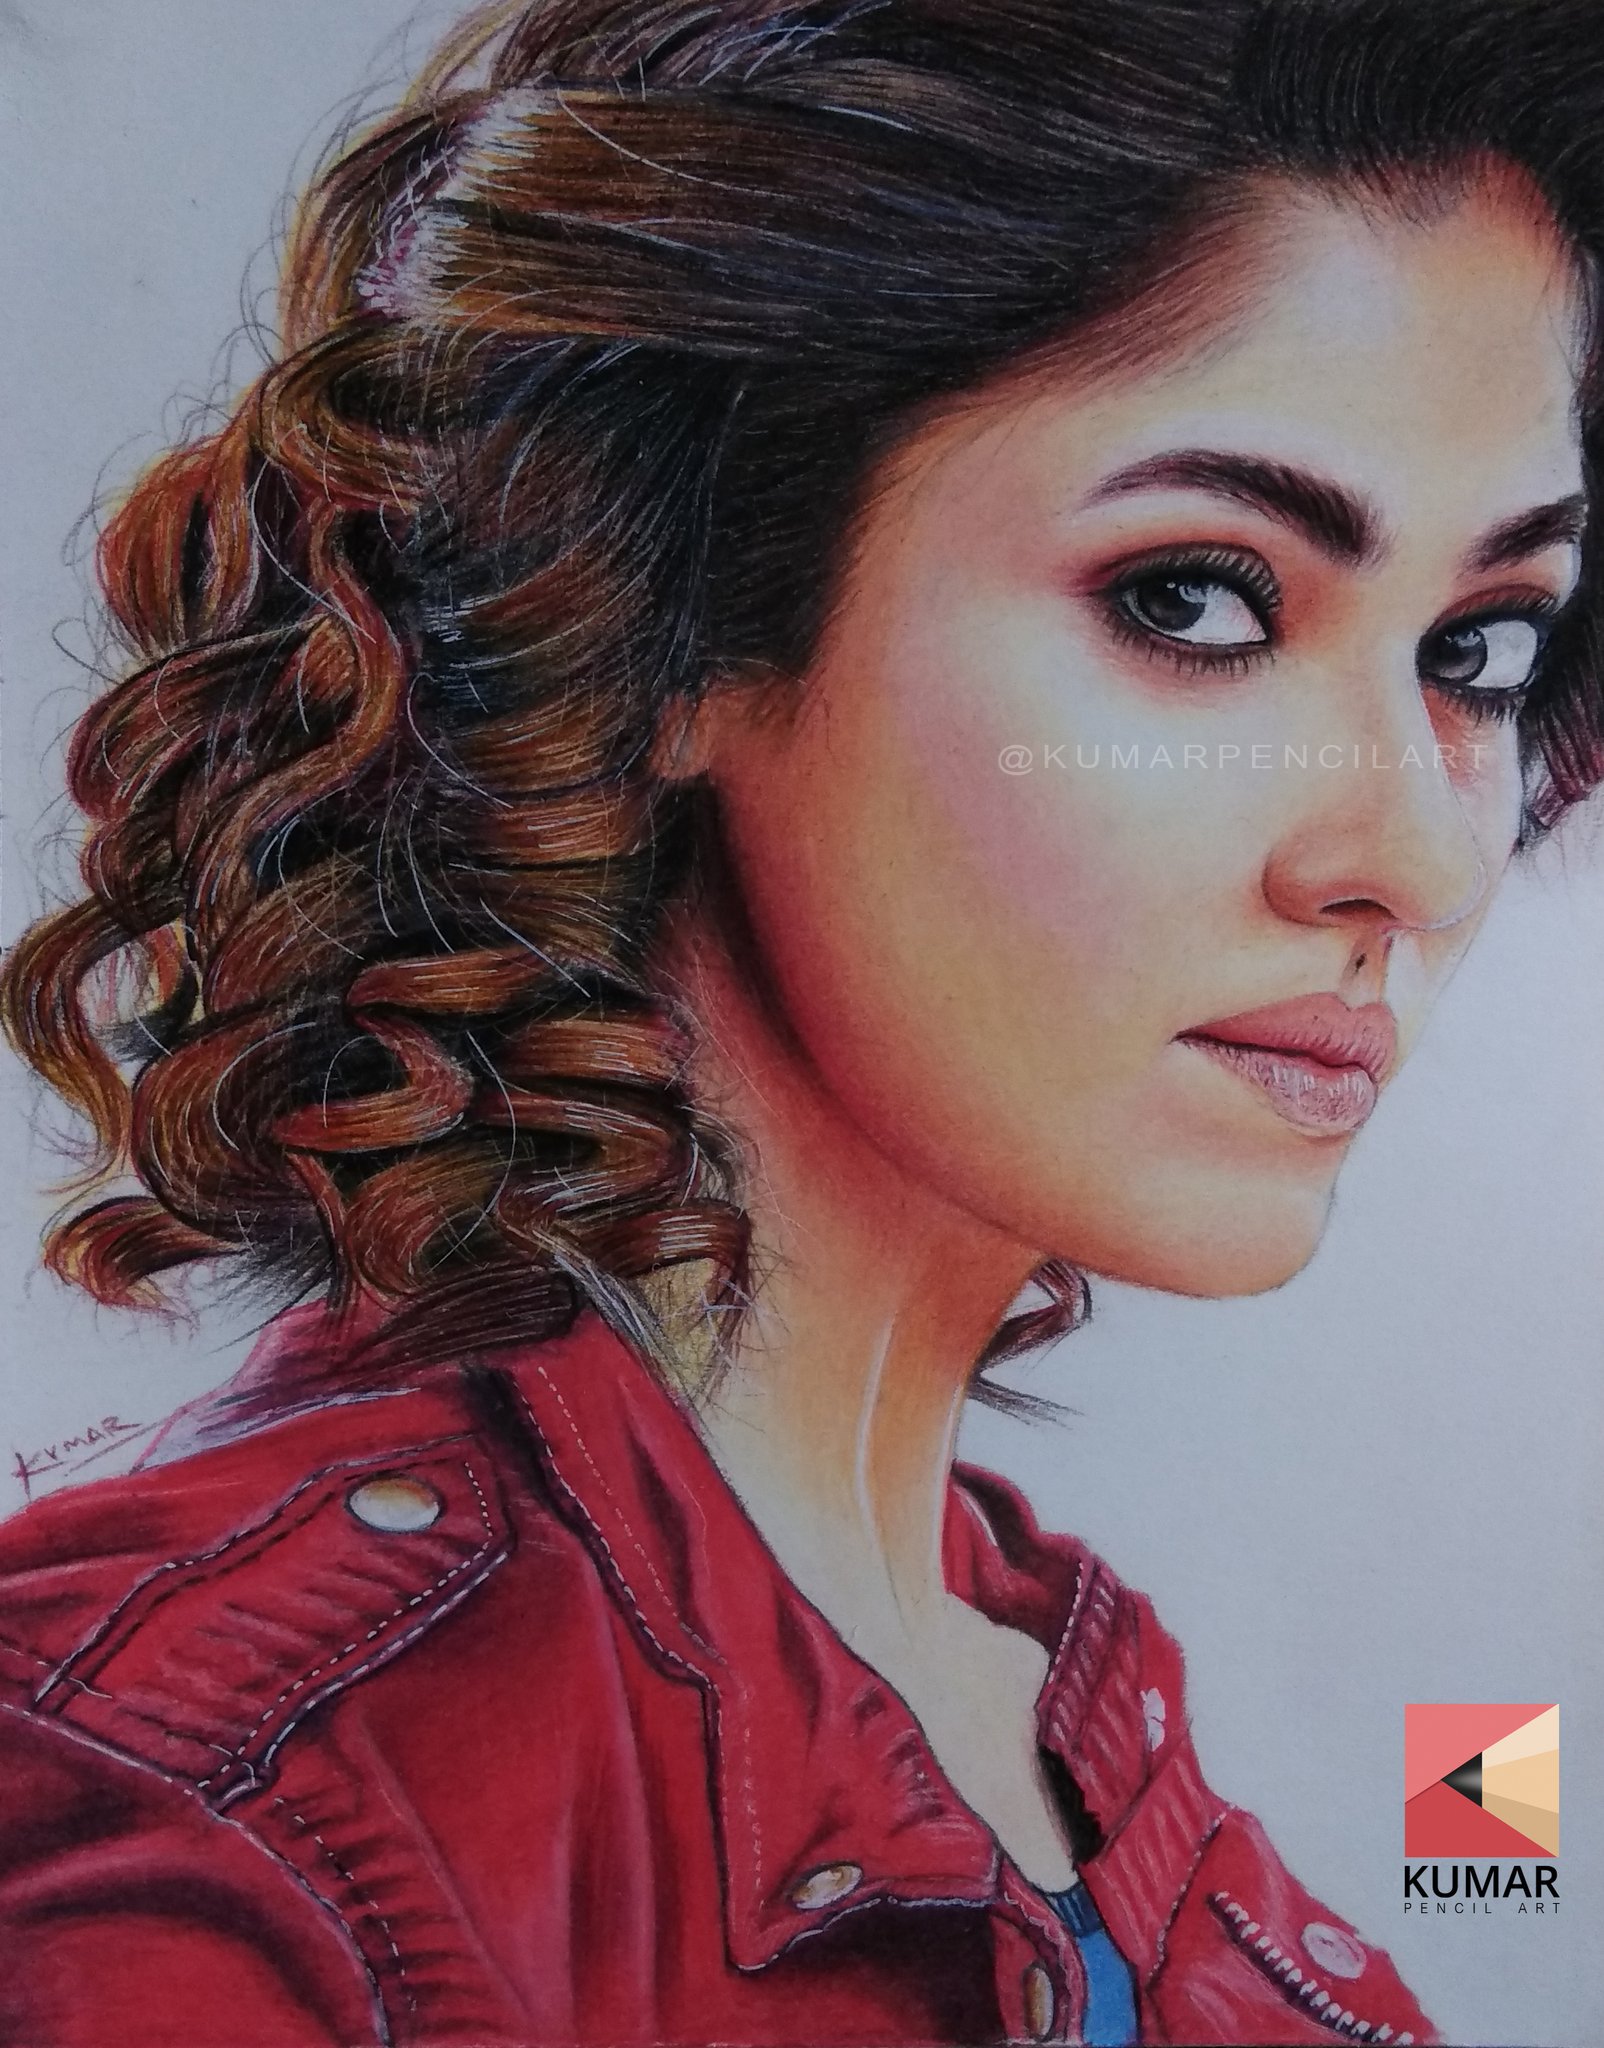 Priya Lakshmi Art - Completed Drawing of South Indian actress Nayanthara  #myfav It took me +/- 25 hrs! Do share your view's! Materials : PENCIL  Steadtler HB, 2B mars lumograph Faber castell